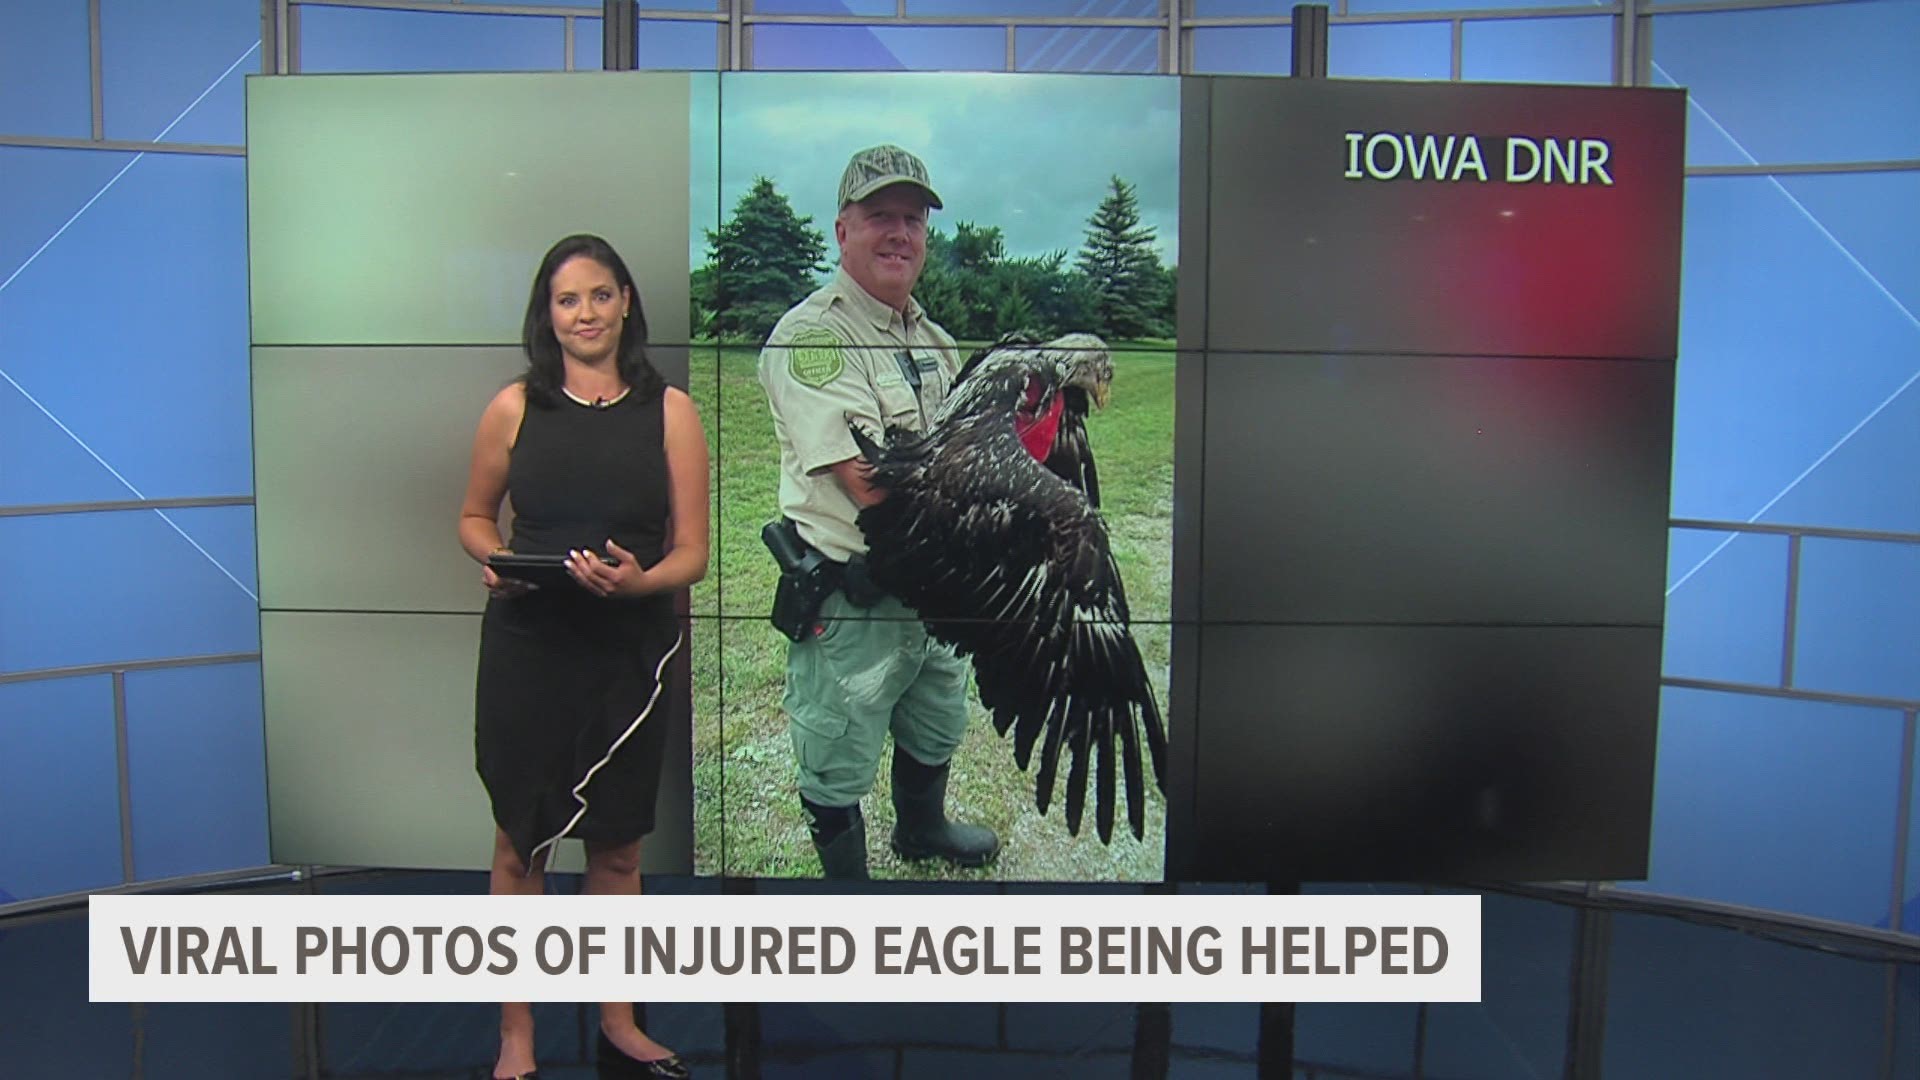 Iowa DNR post showing care for injured bald eagle goes viral